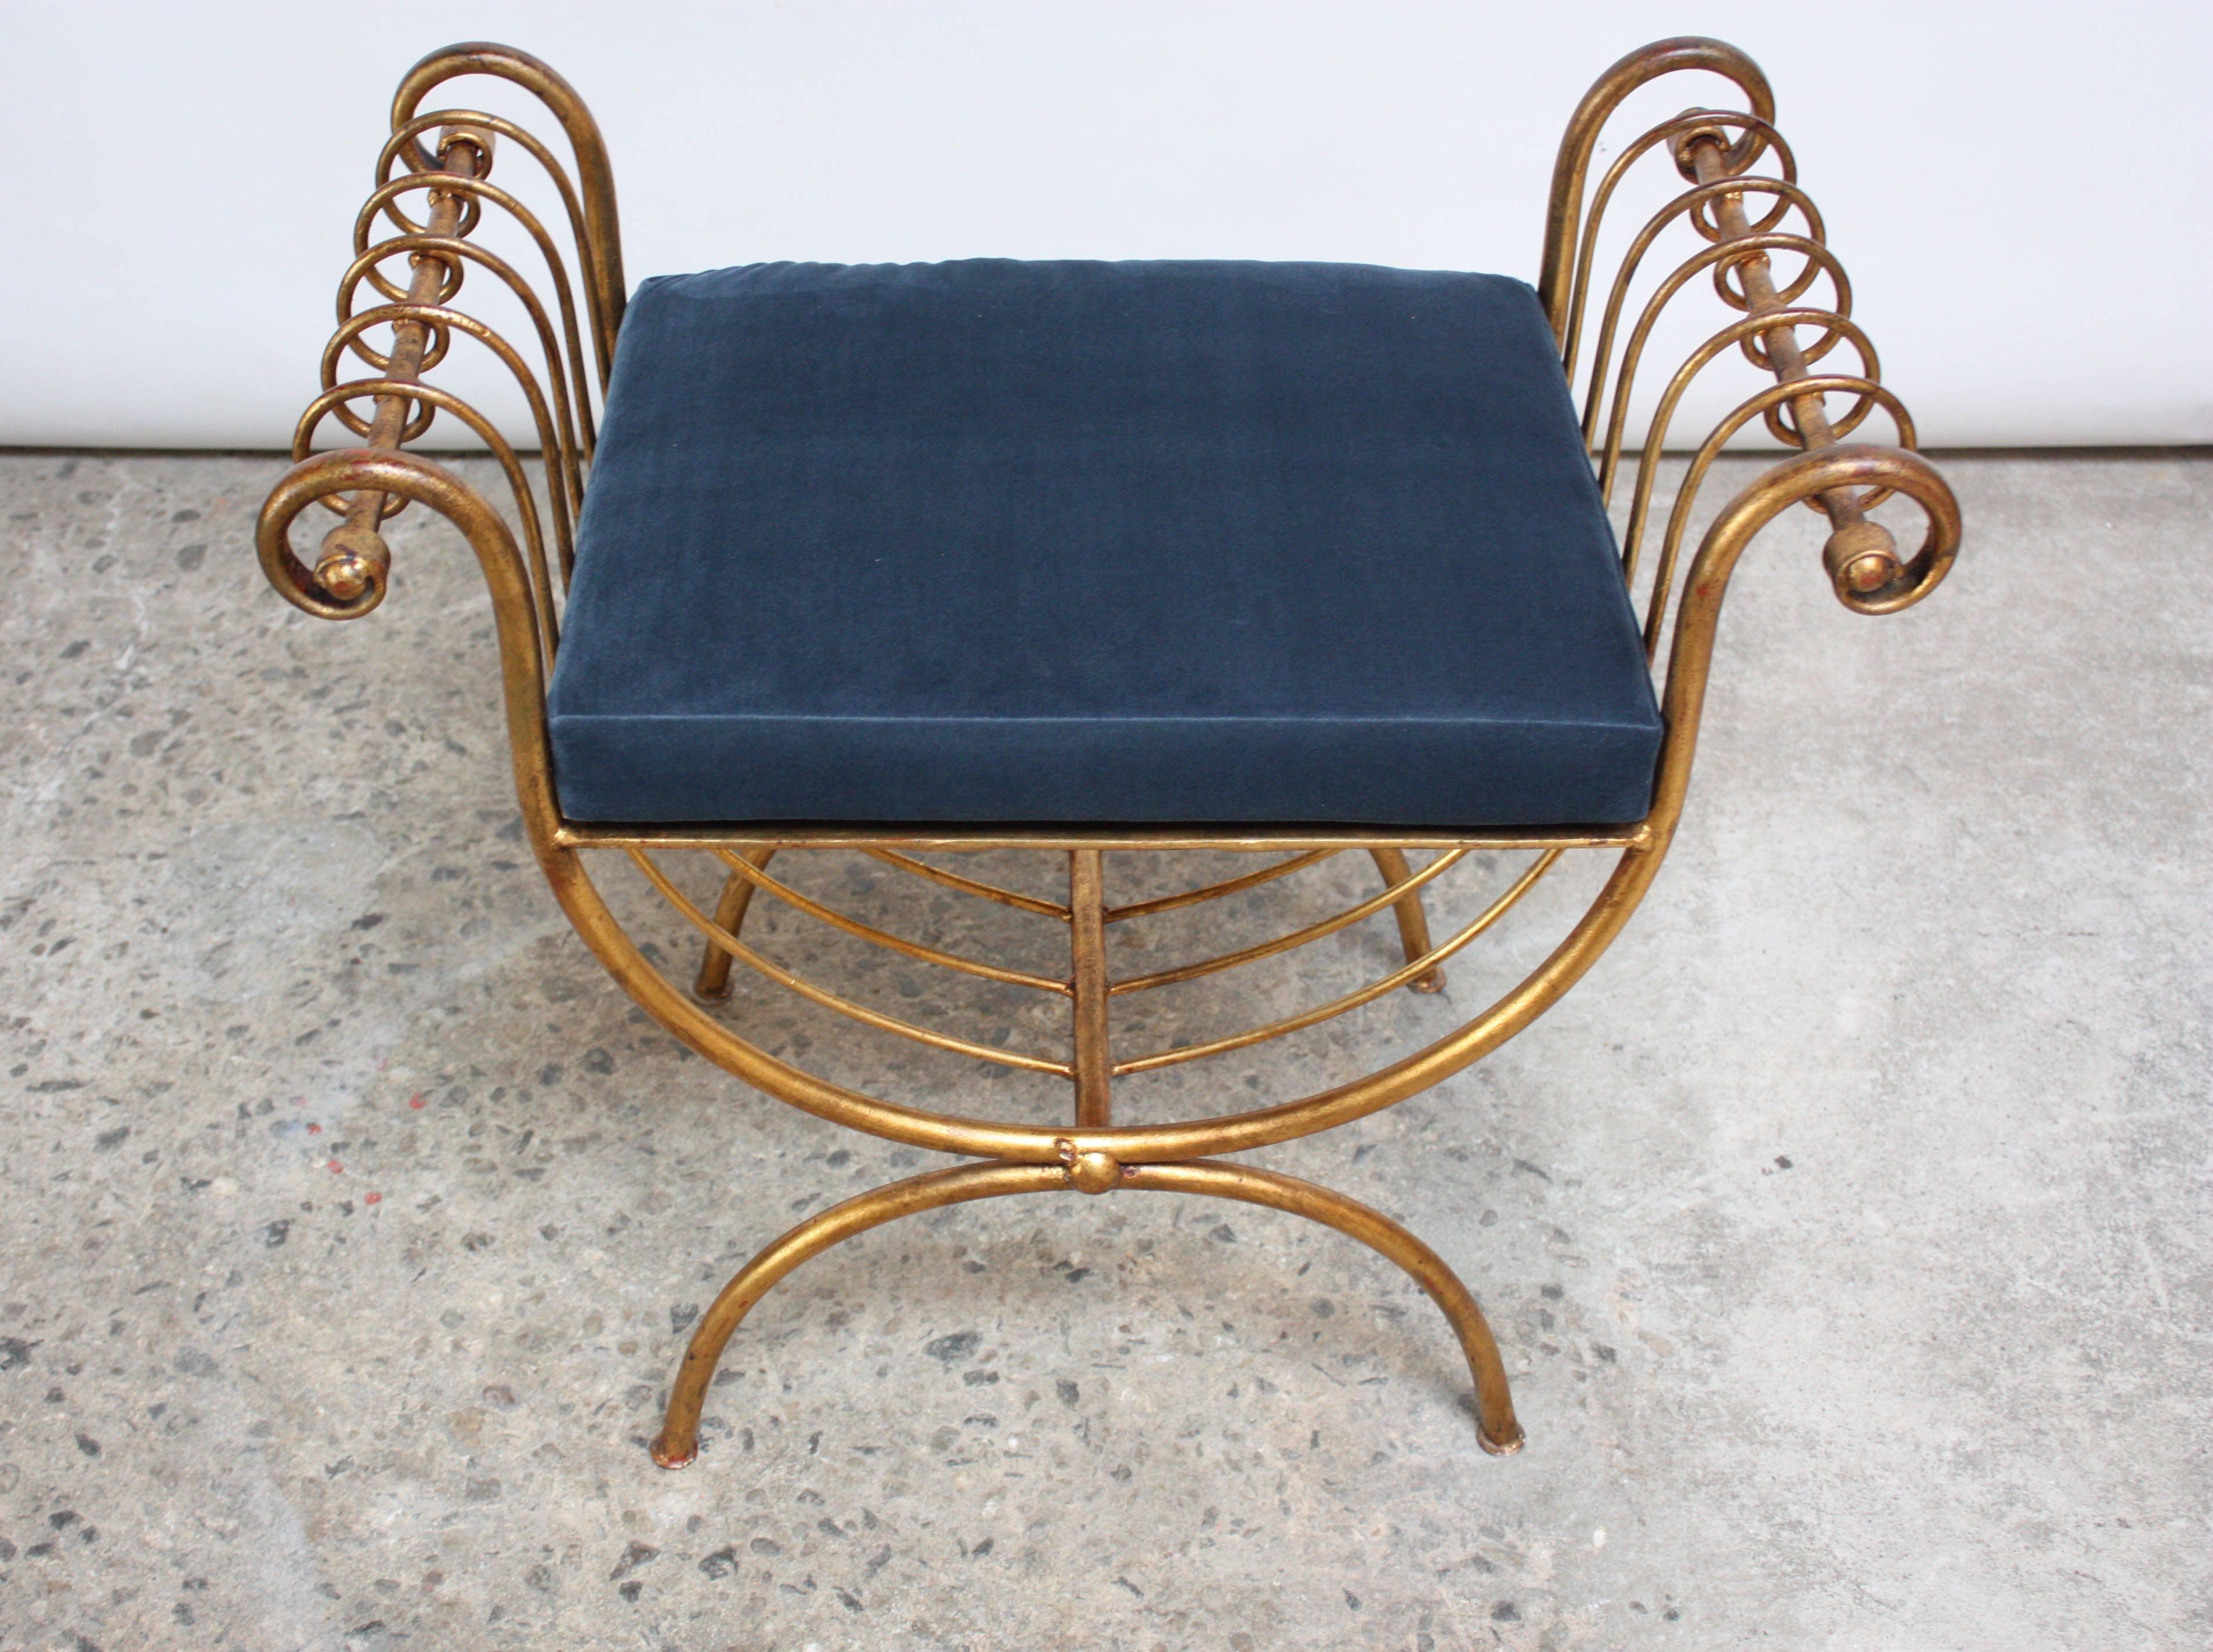 Mid-Century Modern Italian Gilded Metal Stool or Bench with Blue Velvet Cushion by S. Salvadori